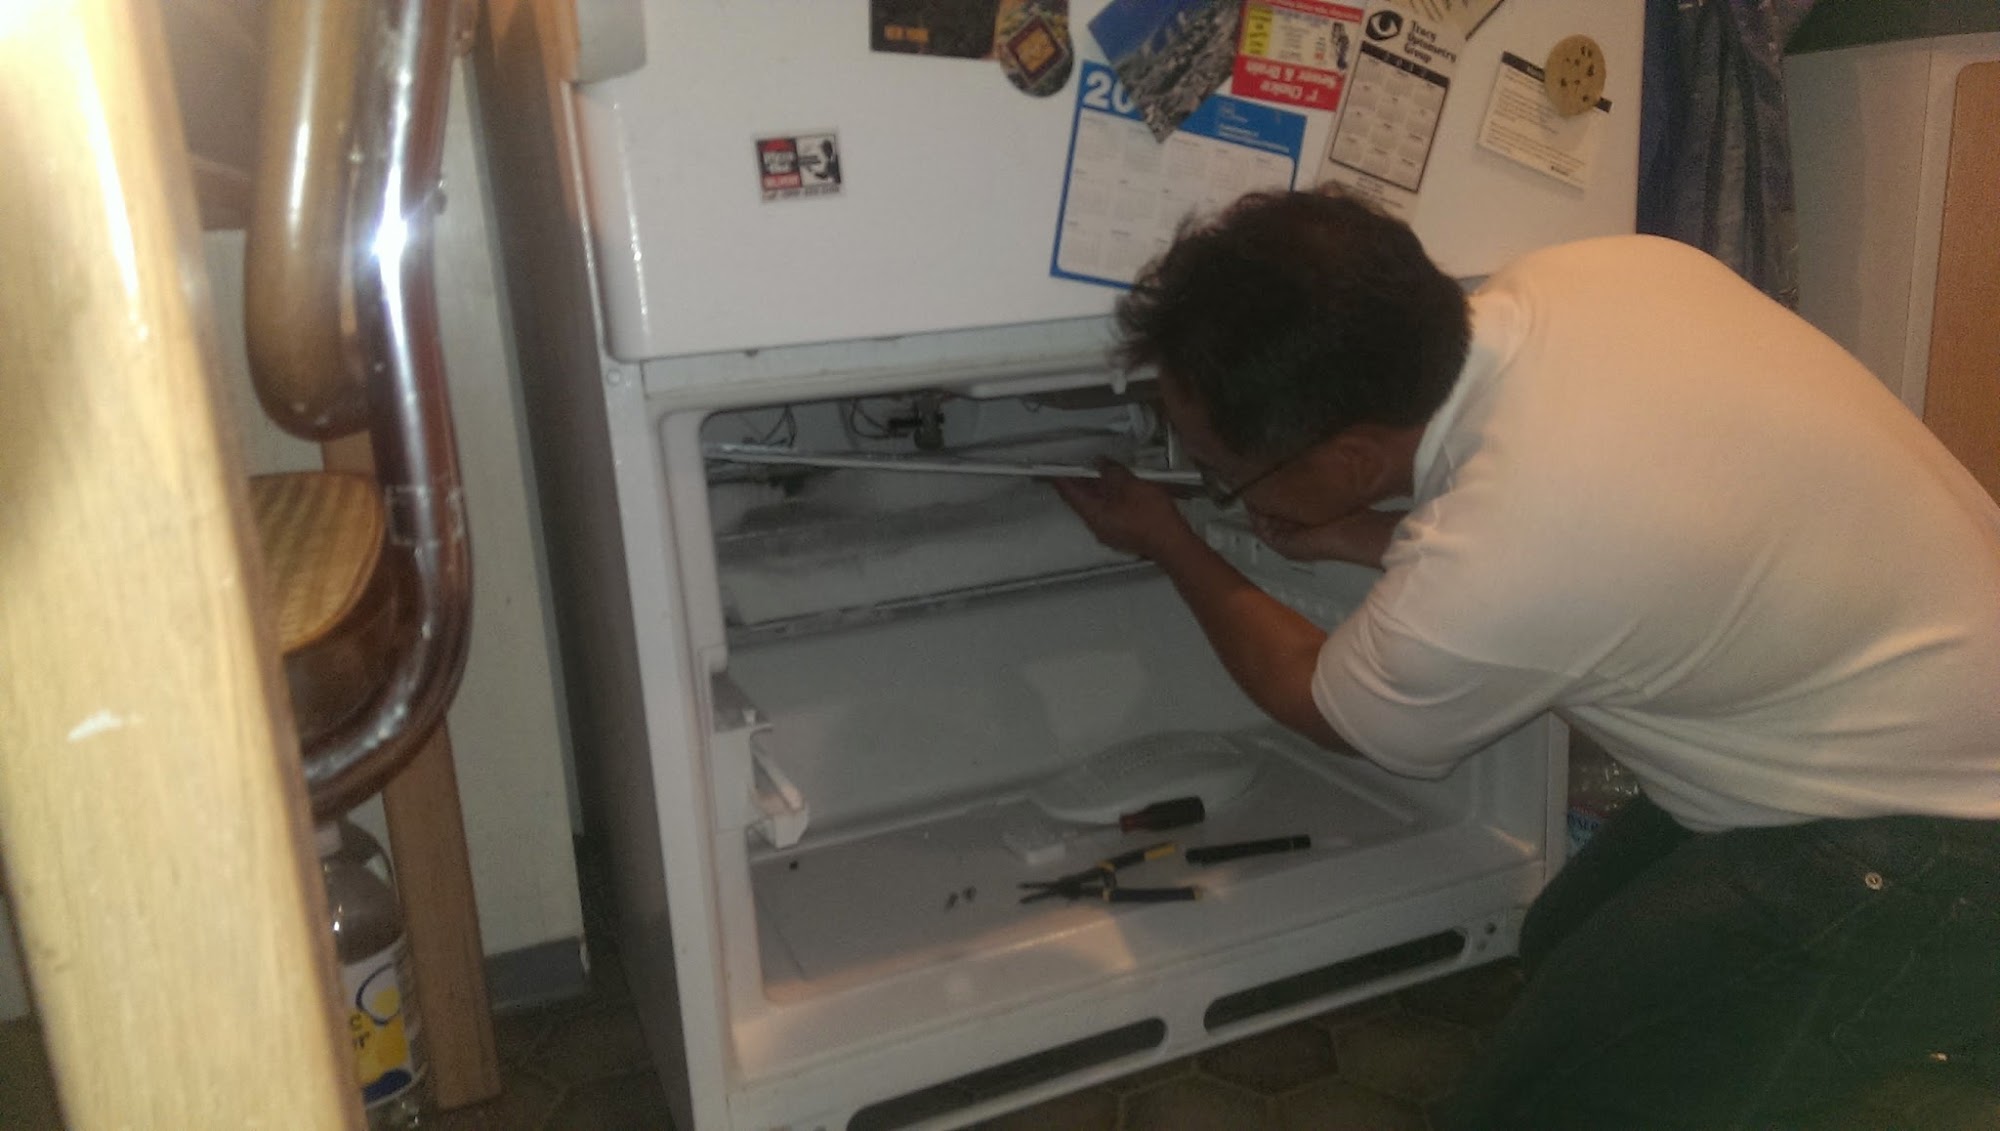 LG Refrigerator Repair by MD Home Services 117 Felicia Ave House, Mountain House California 95391